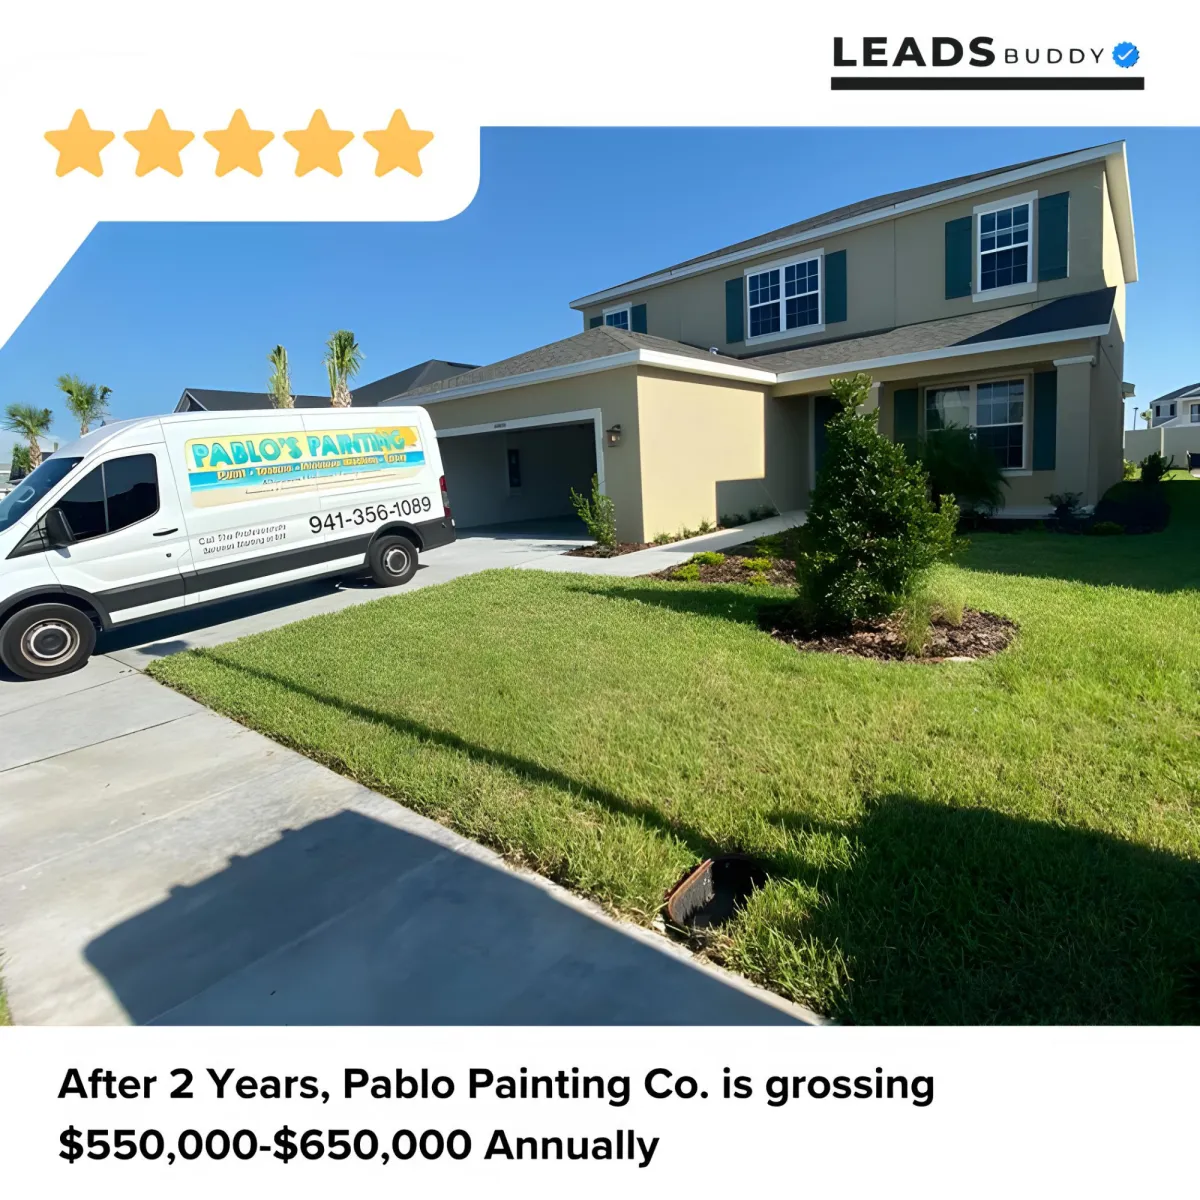 pablos painting with leads buddy marketing residential painters in sarasota